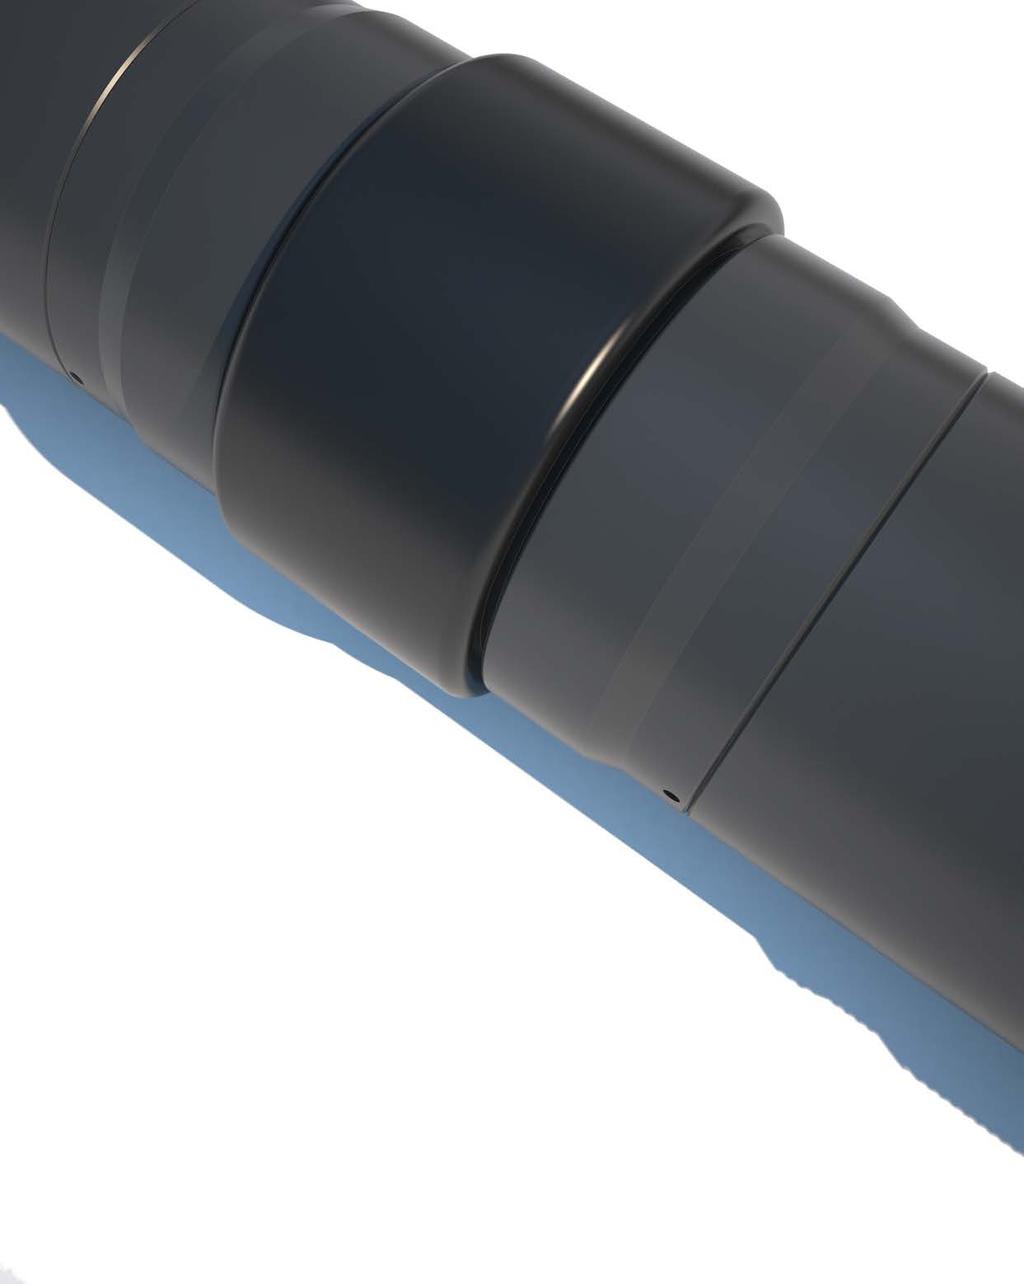 Intervention Products Gemini Retrievable Bridge Plug The Gemini Retrievable Bridge Plug is a high performance monobore plugging device which can be set at any required depth in the tubing or casing.